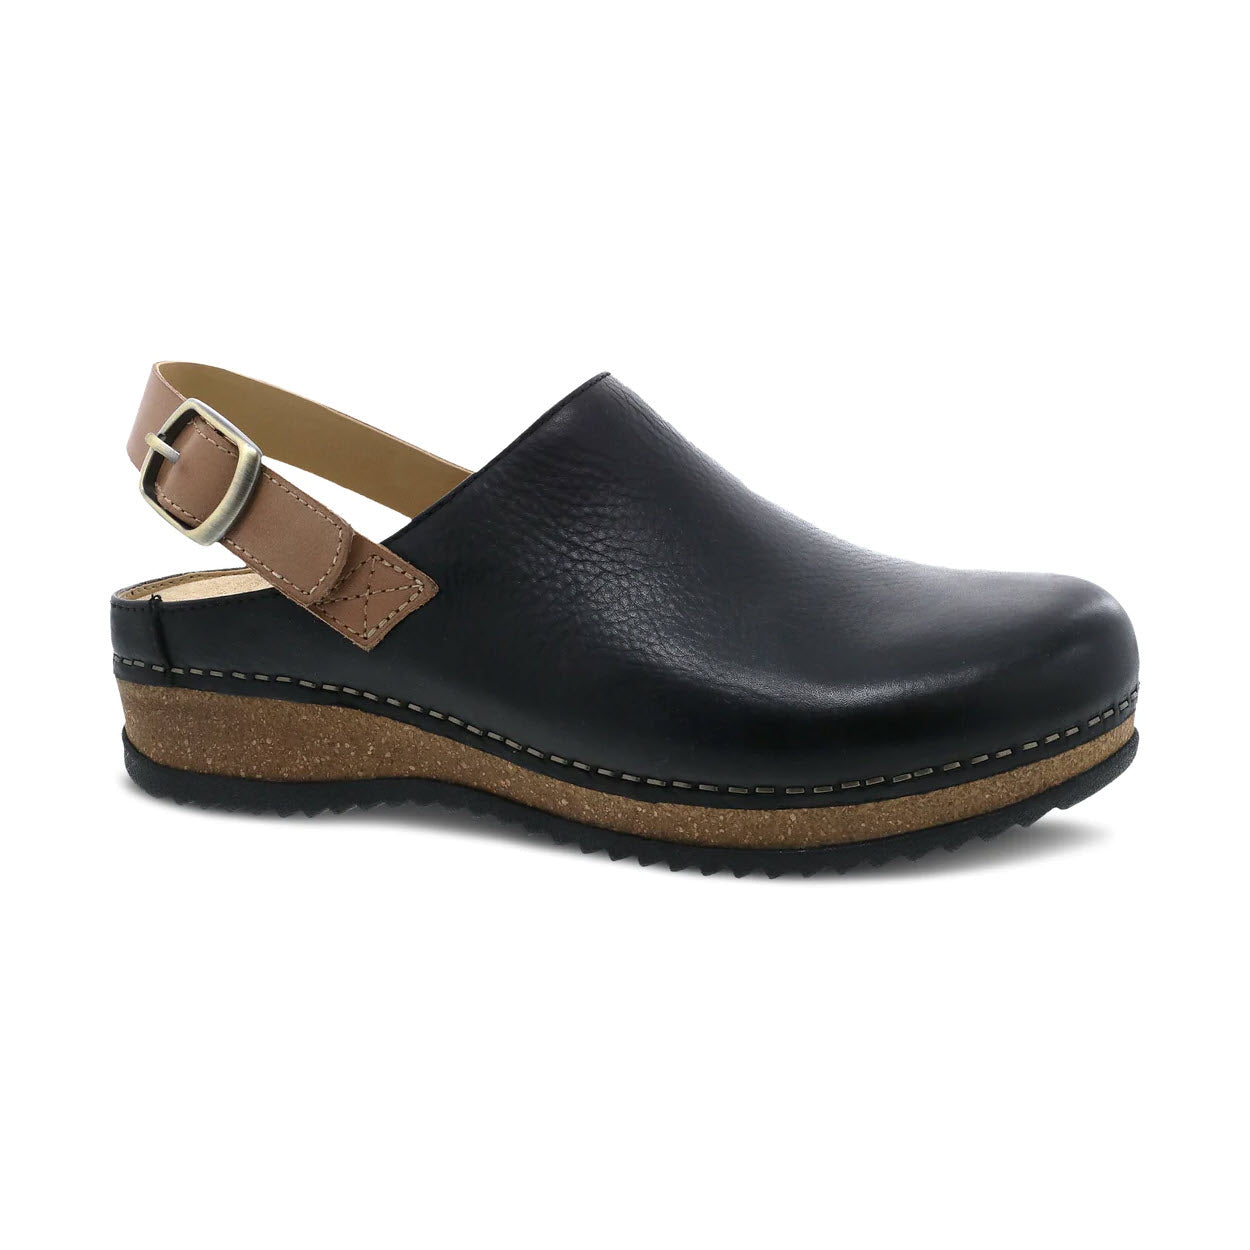 Dansko Merrin Black Waxy clog with a strap and sustainable cork sole isolated on a white background.